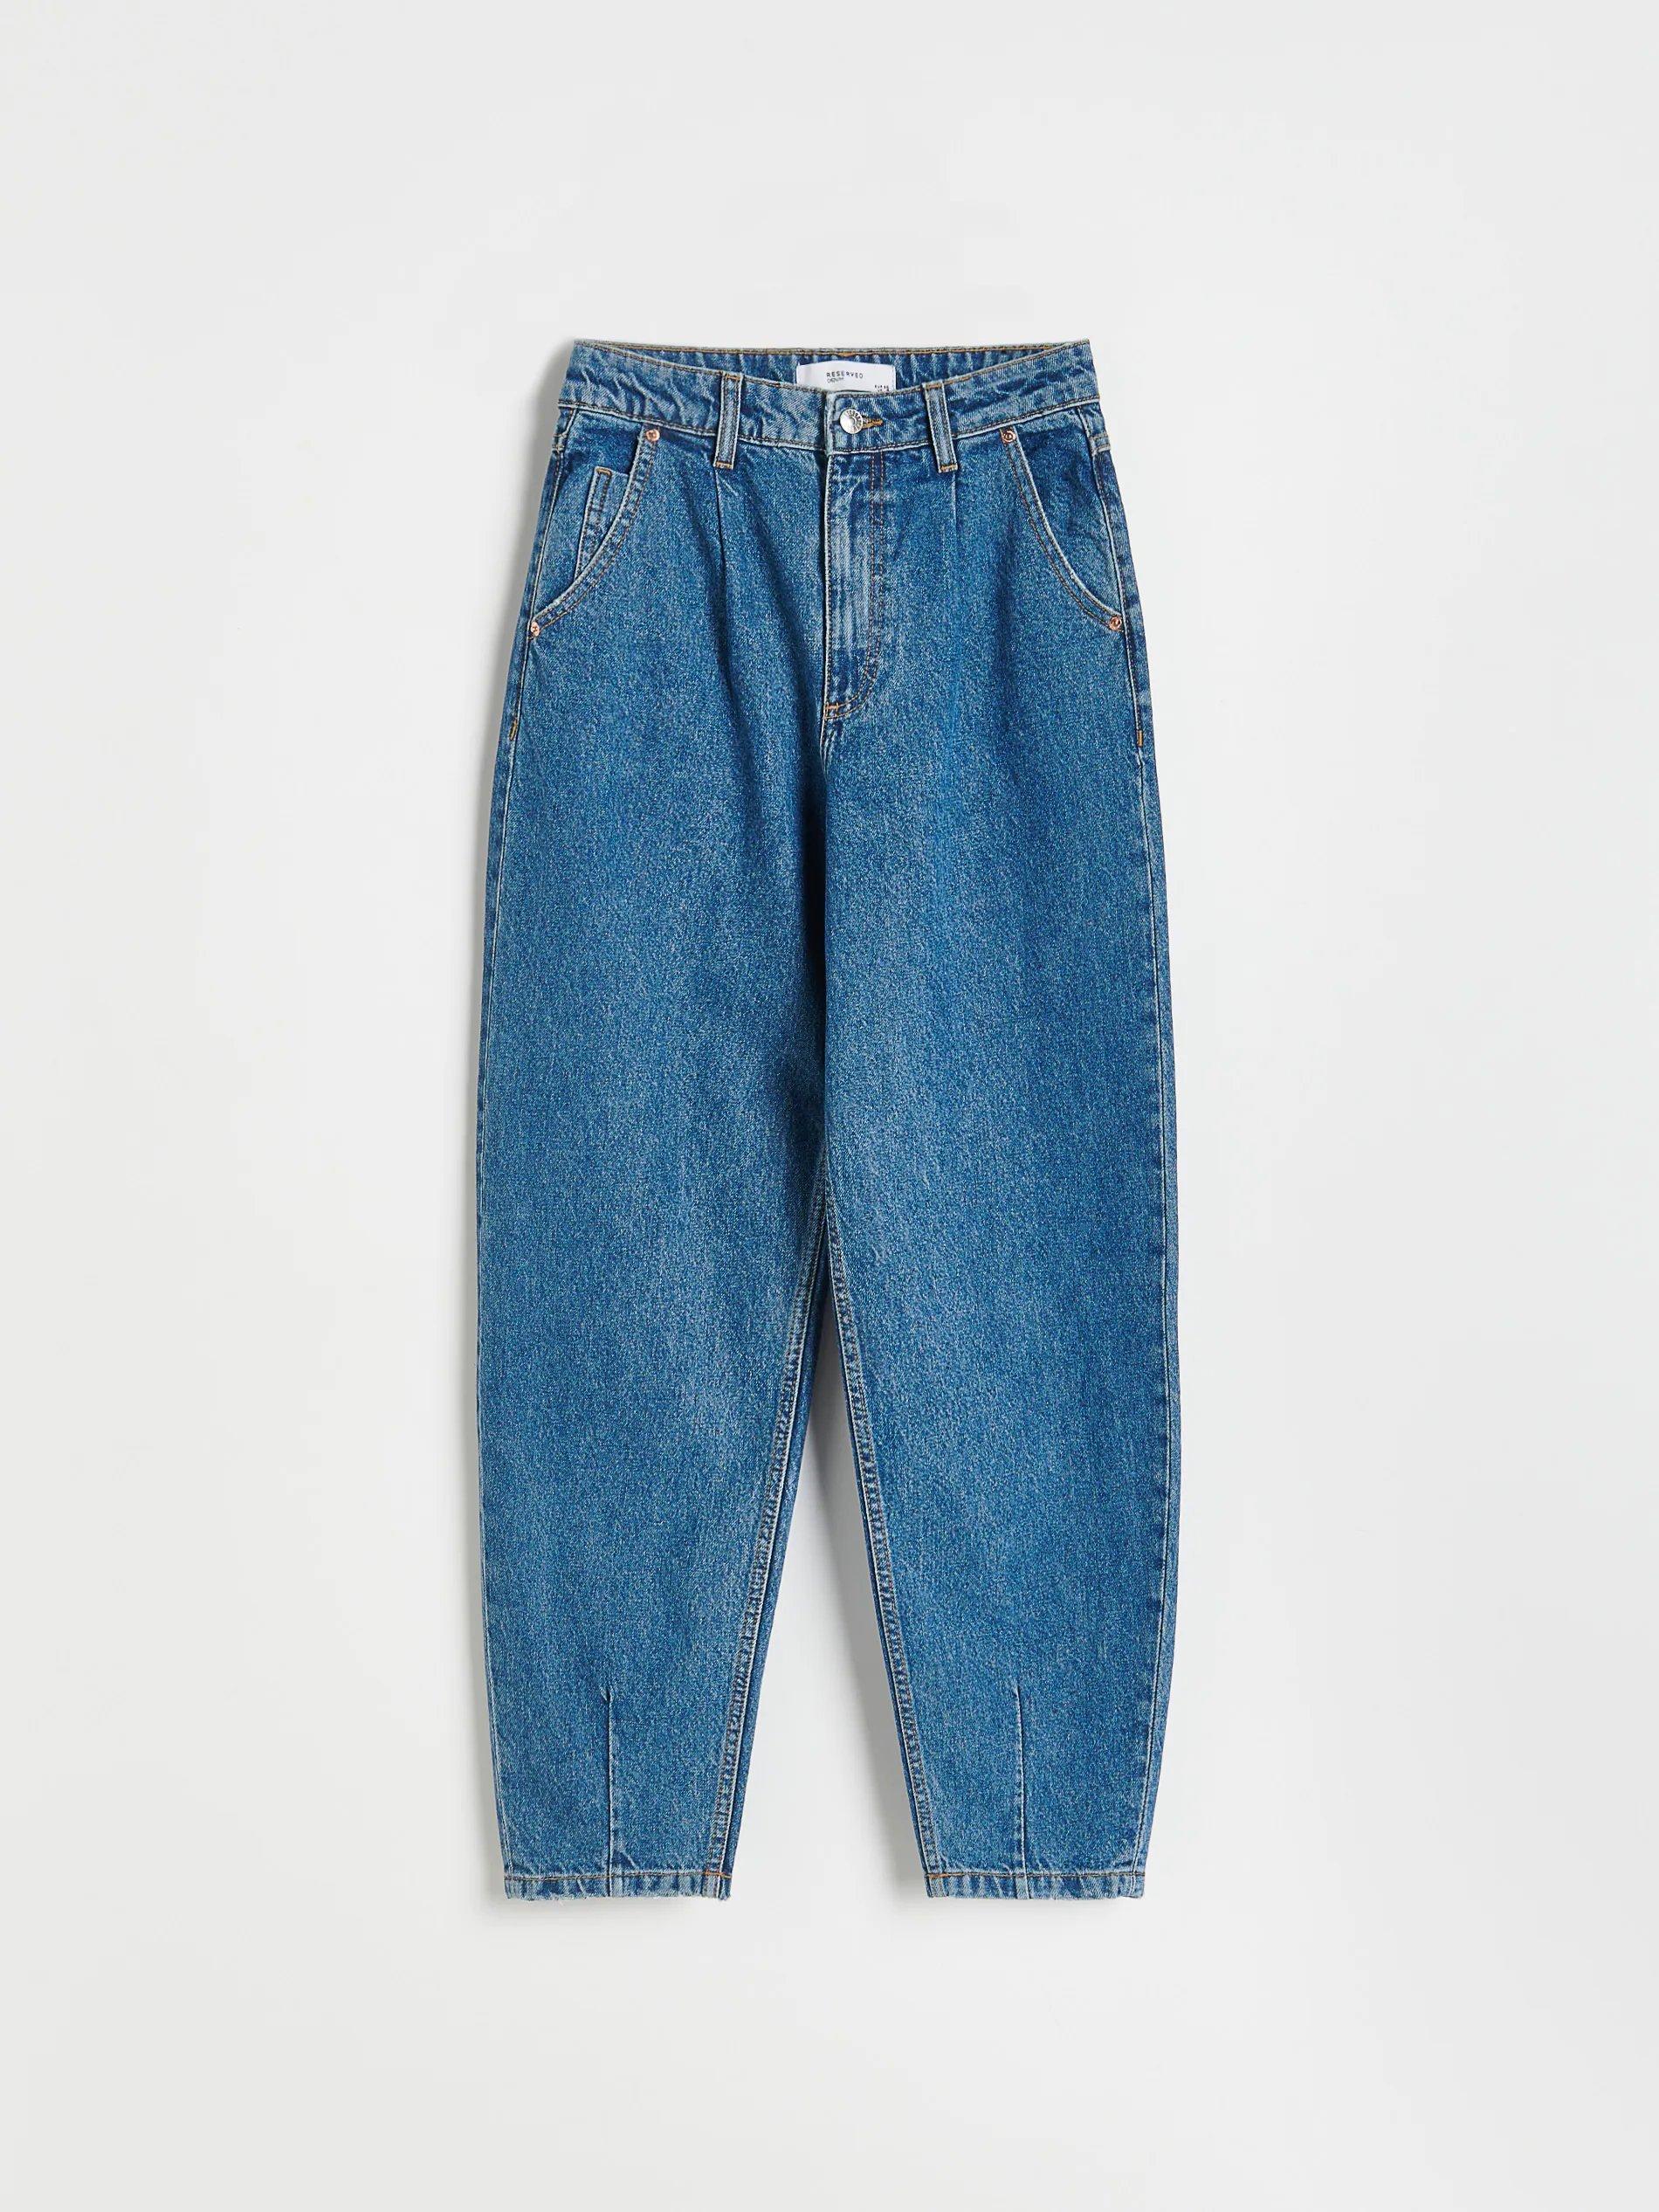 Reserved - Blue Balloon Jeans, Women